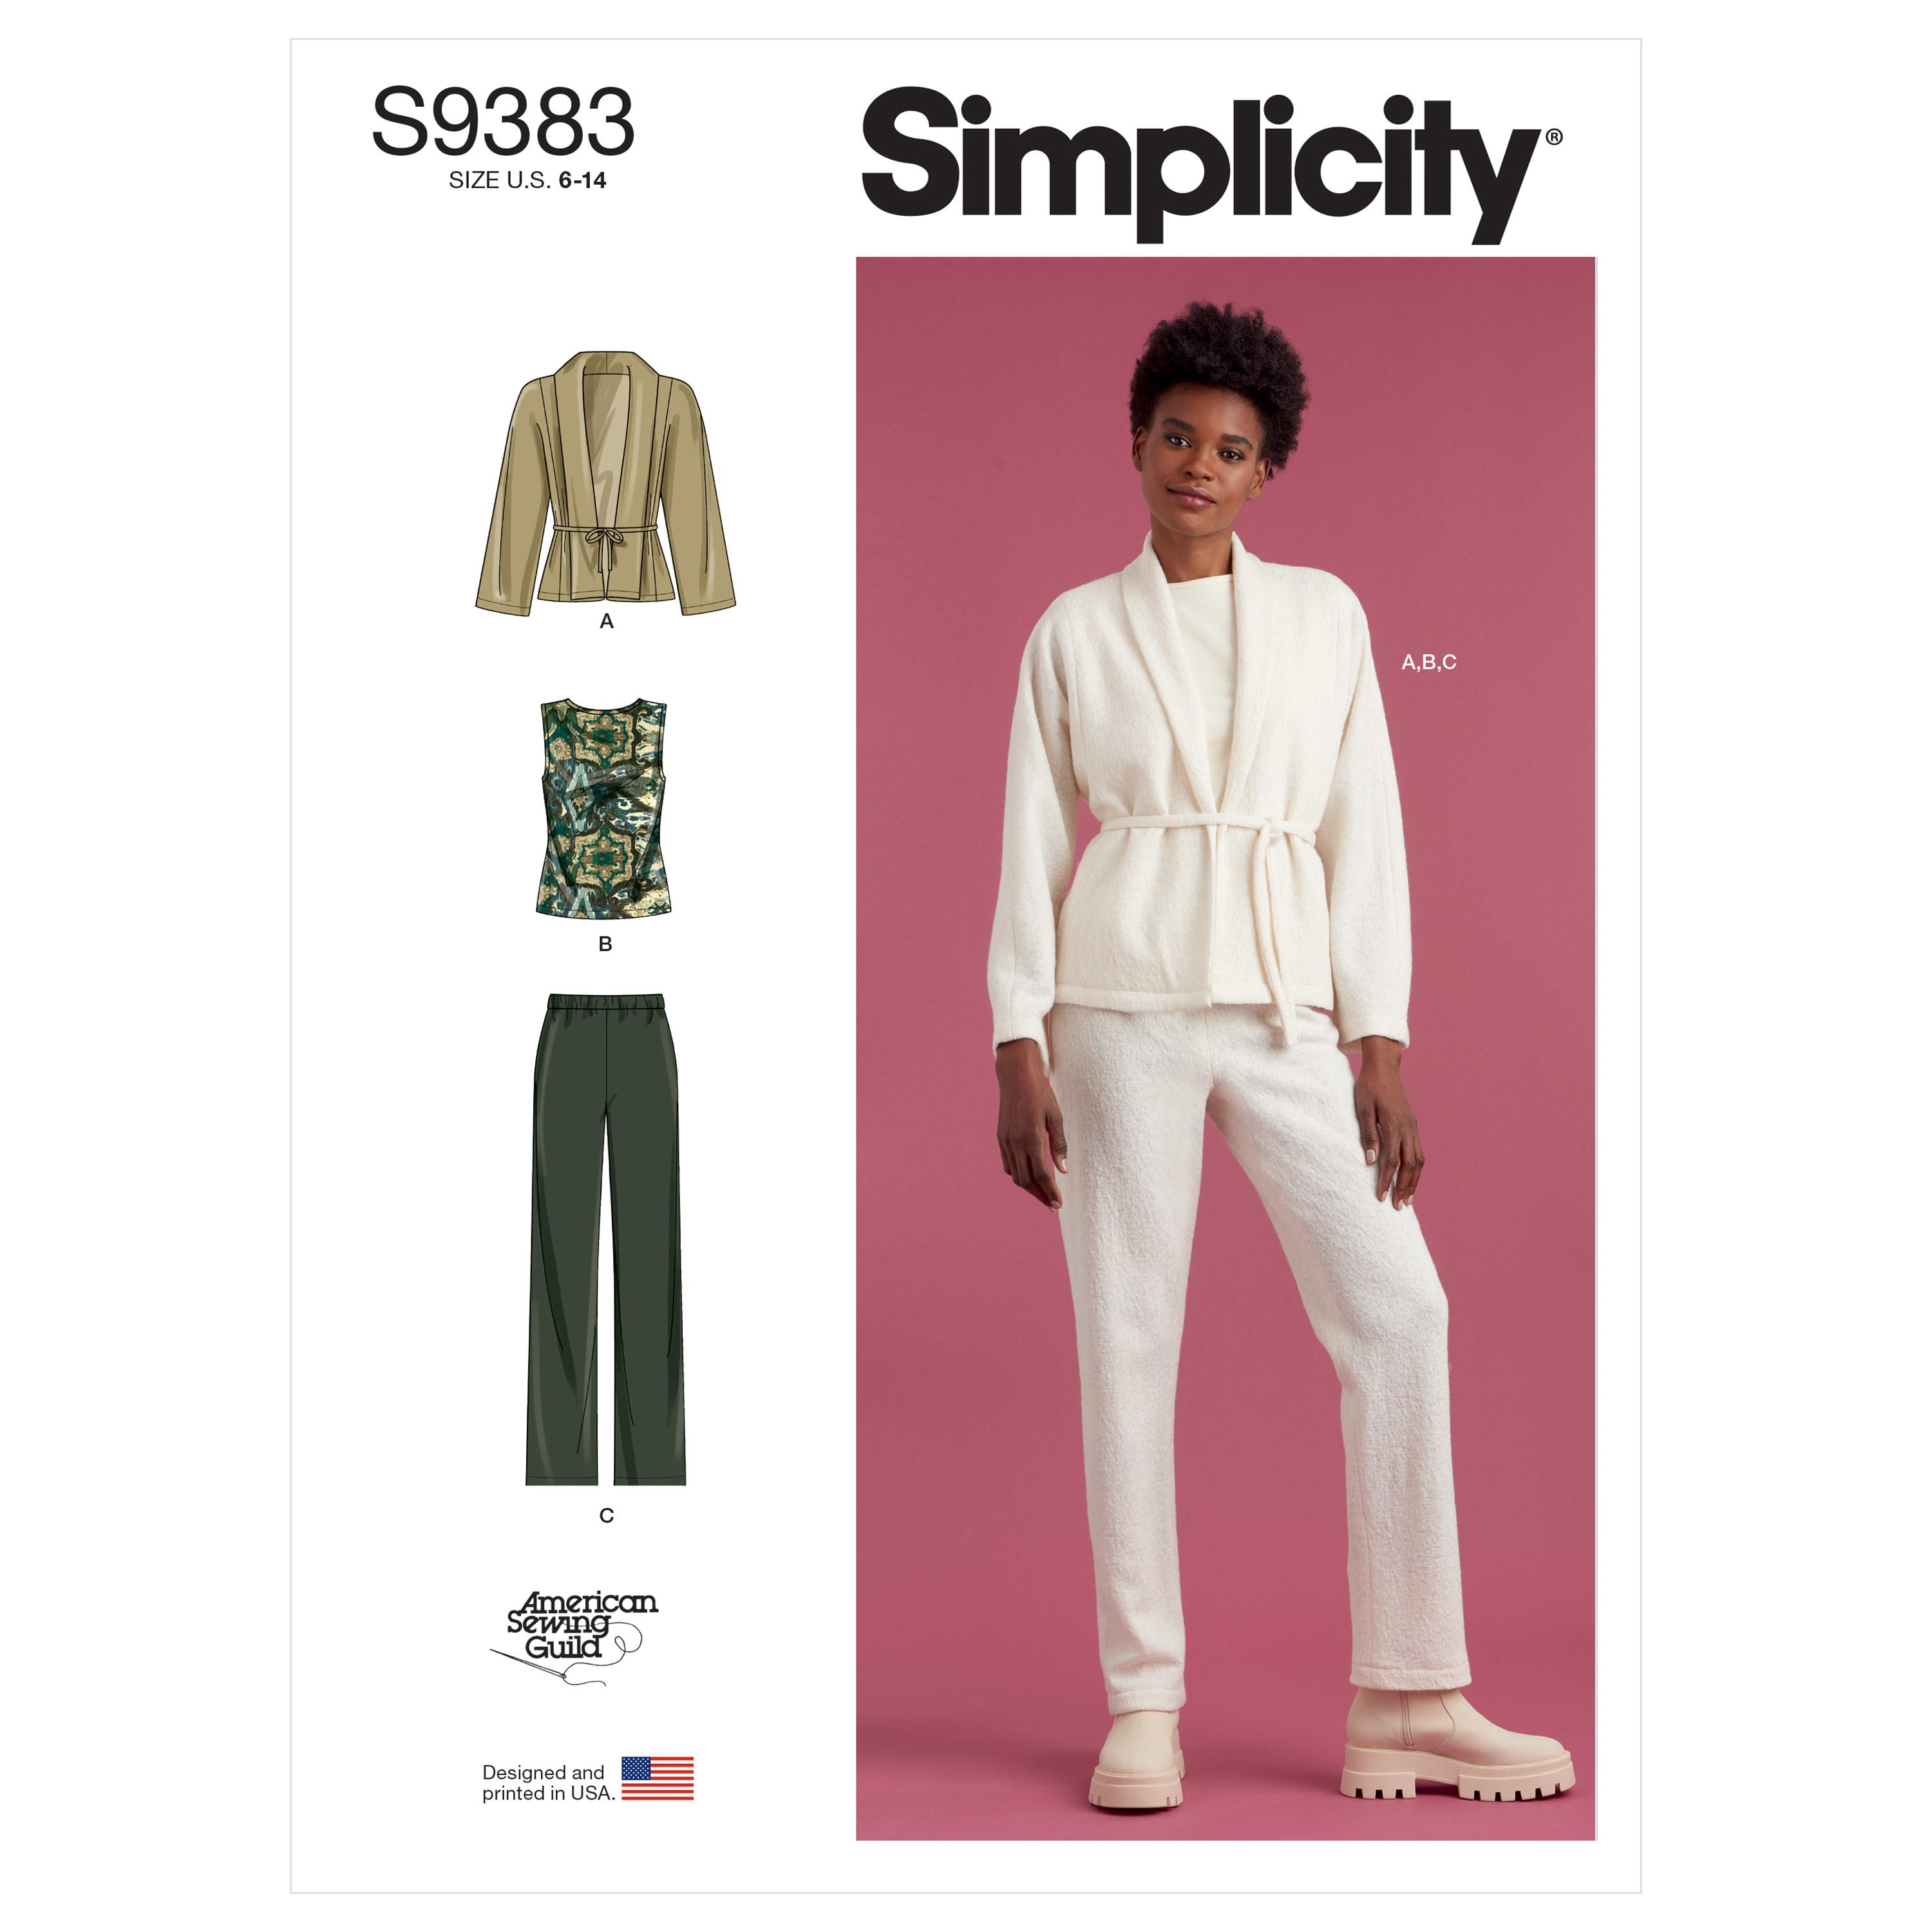 Simplicity Sewing Pattern S9383 Misses' Jacket, Knit Top and Pants